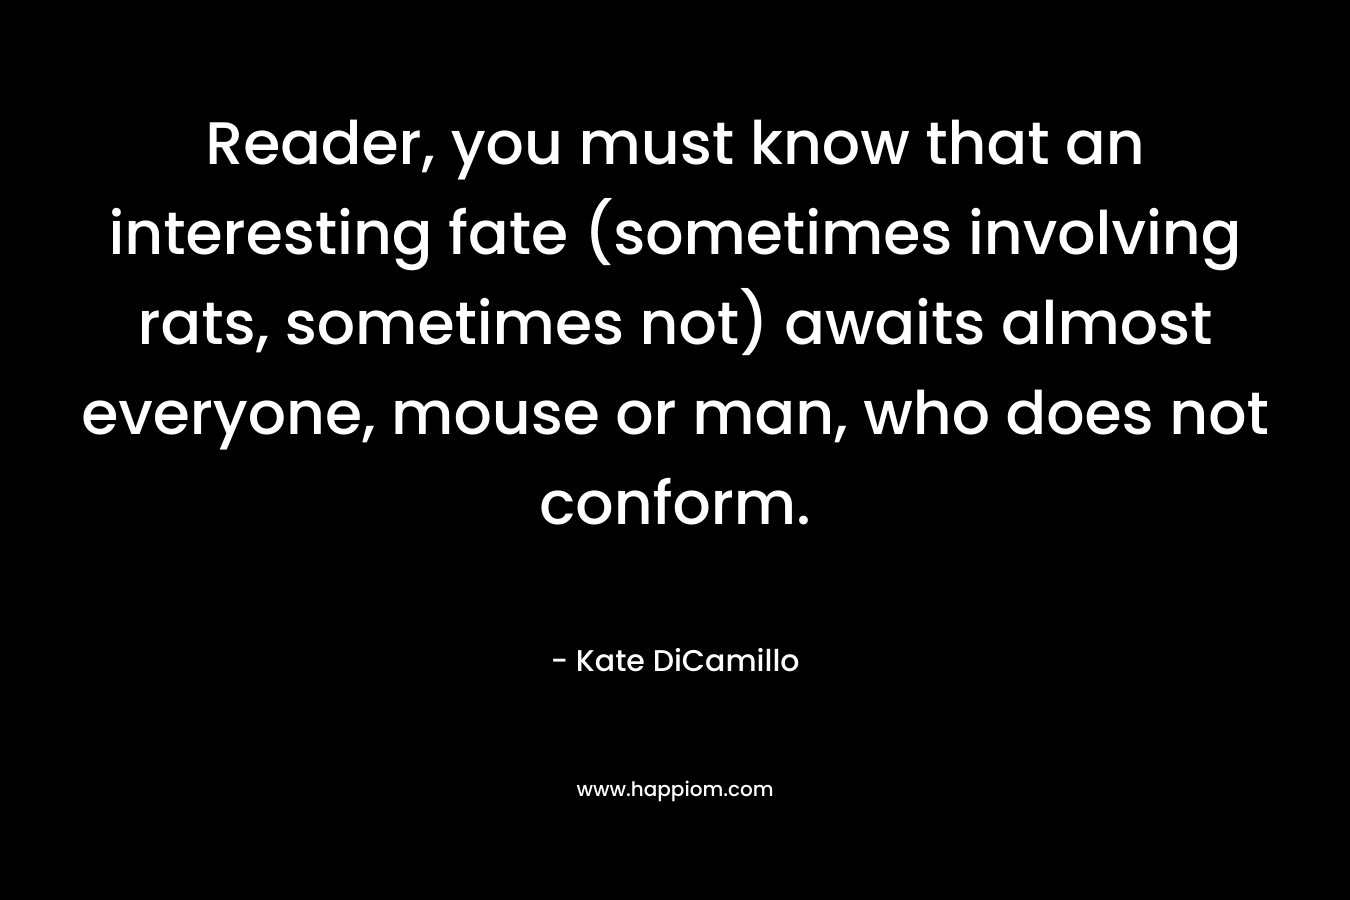 Reader, you must know that an interesting fate (sometimes involving rats, sometimes not) awaits almost everyone, mouse or man, who does not conform.